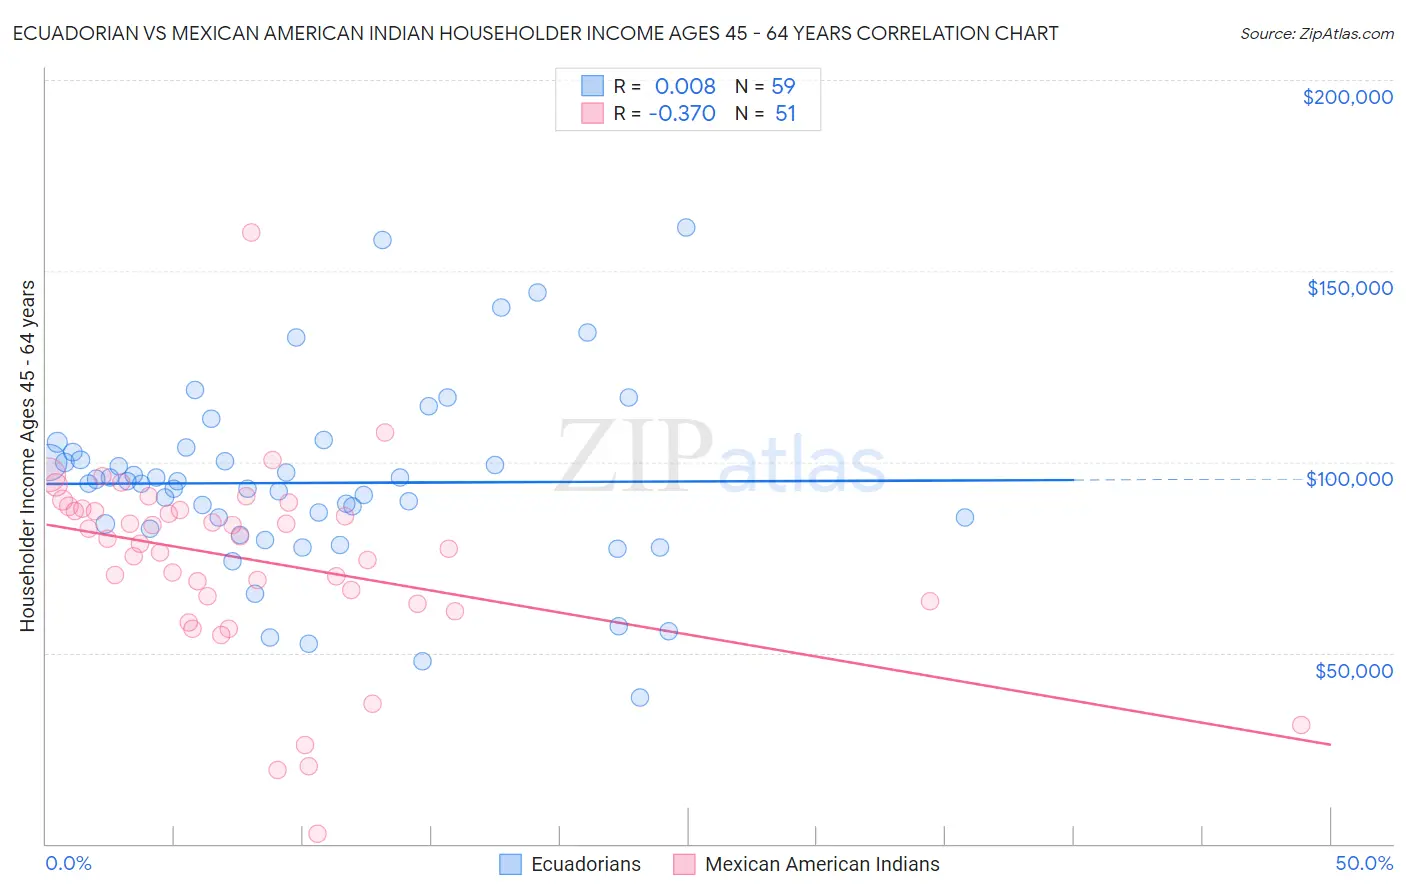 Ecuadorian vs Mexican American Indian Householder Income Ages 45 - 64 years